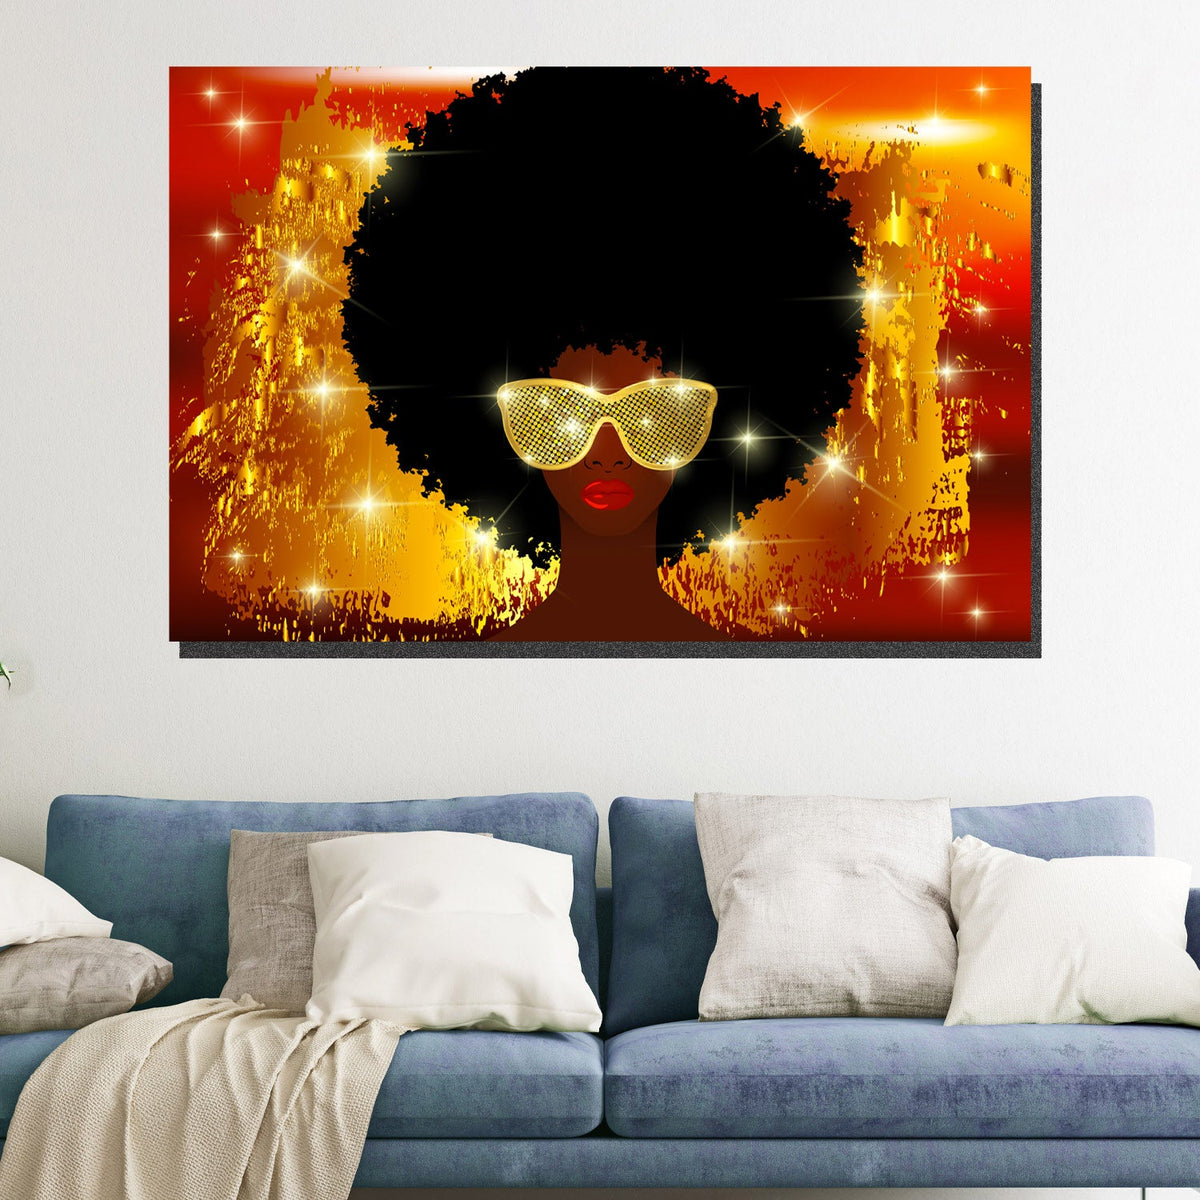 https://cdn.shopify.com/s/files/1/0387/9986/8044/products/GlamorousAfricanWomanCanvasArtprintStretched-3.jpg